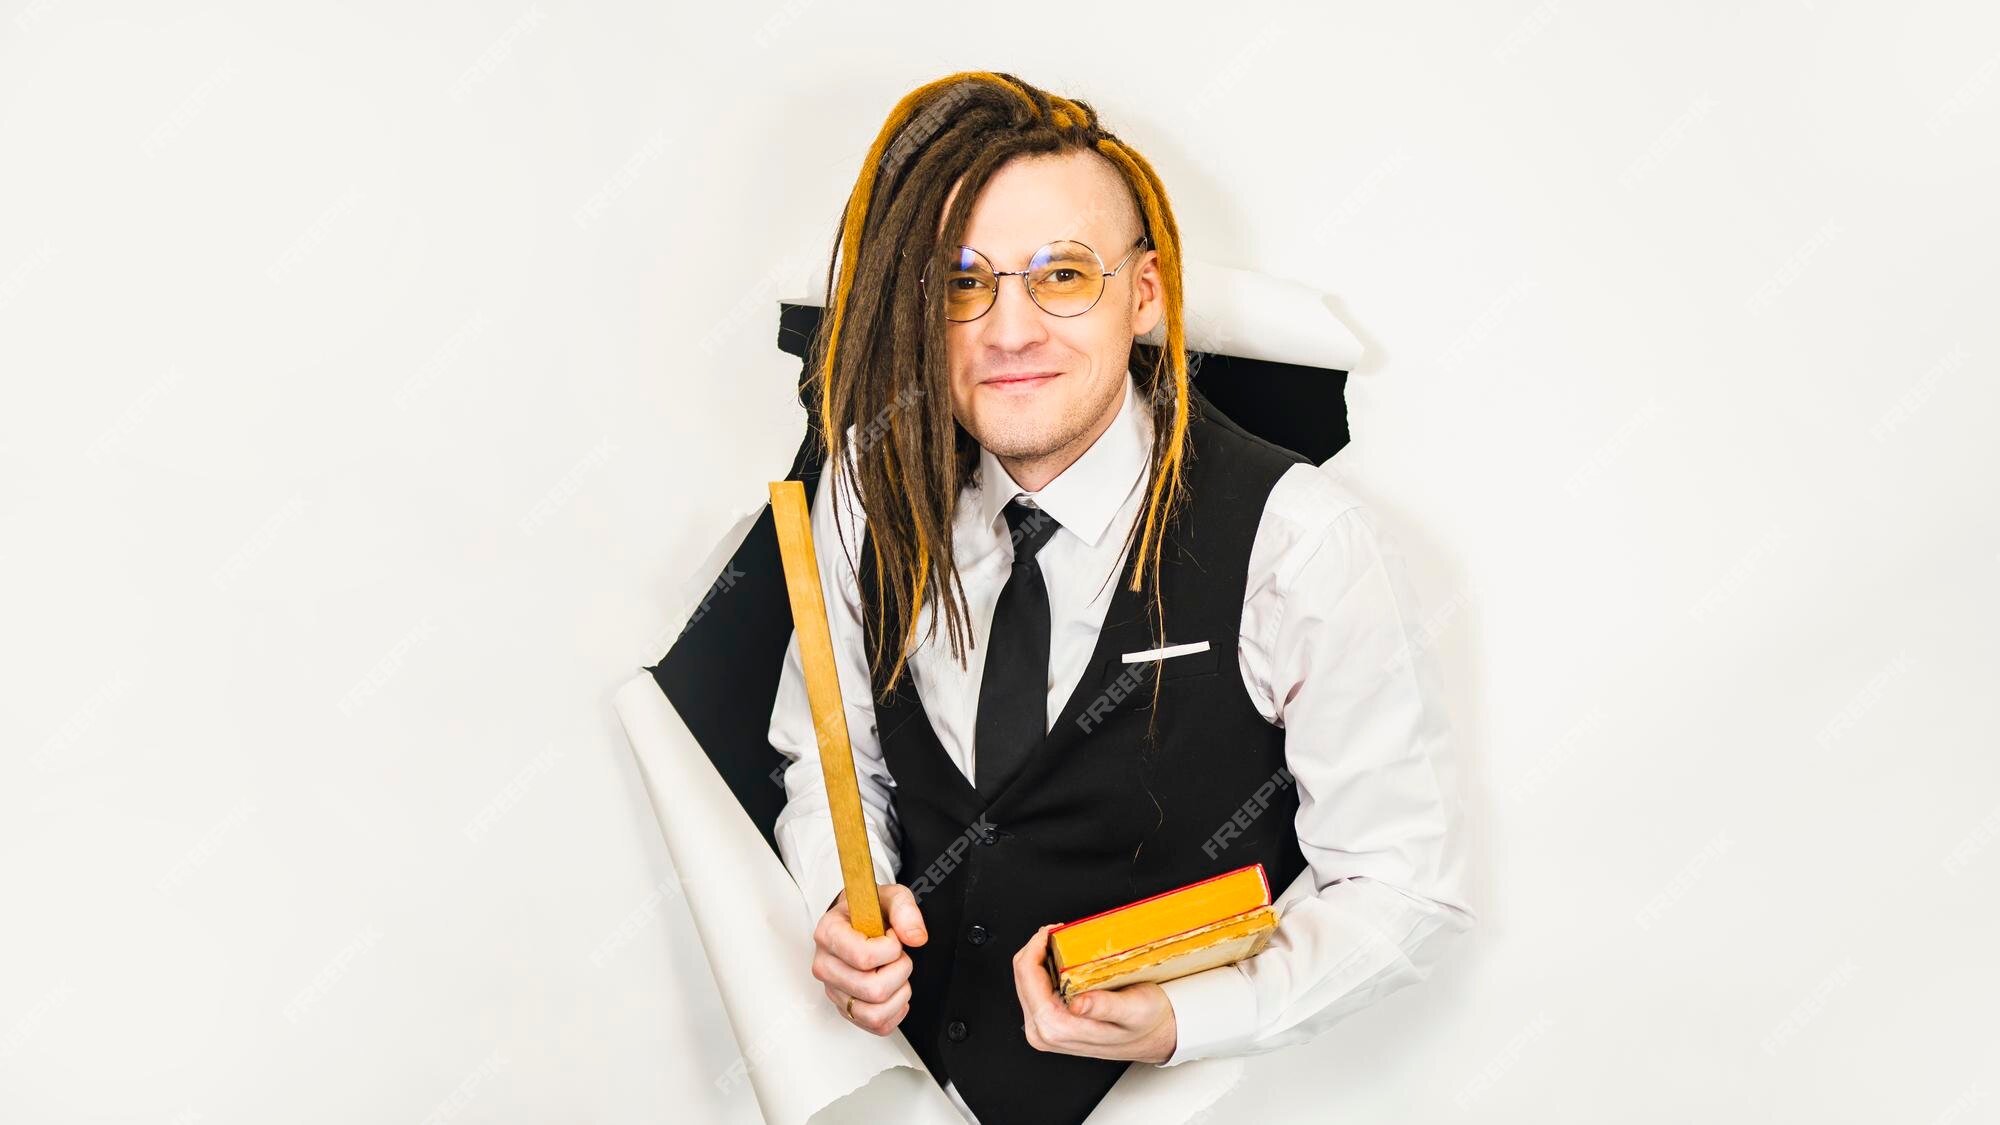 Premium Photo | Young teacher in glasses with ruler and books in hole of white  background male pedagogue with modern hairstyle dreadlocks looking at  camera in studio